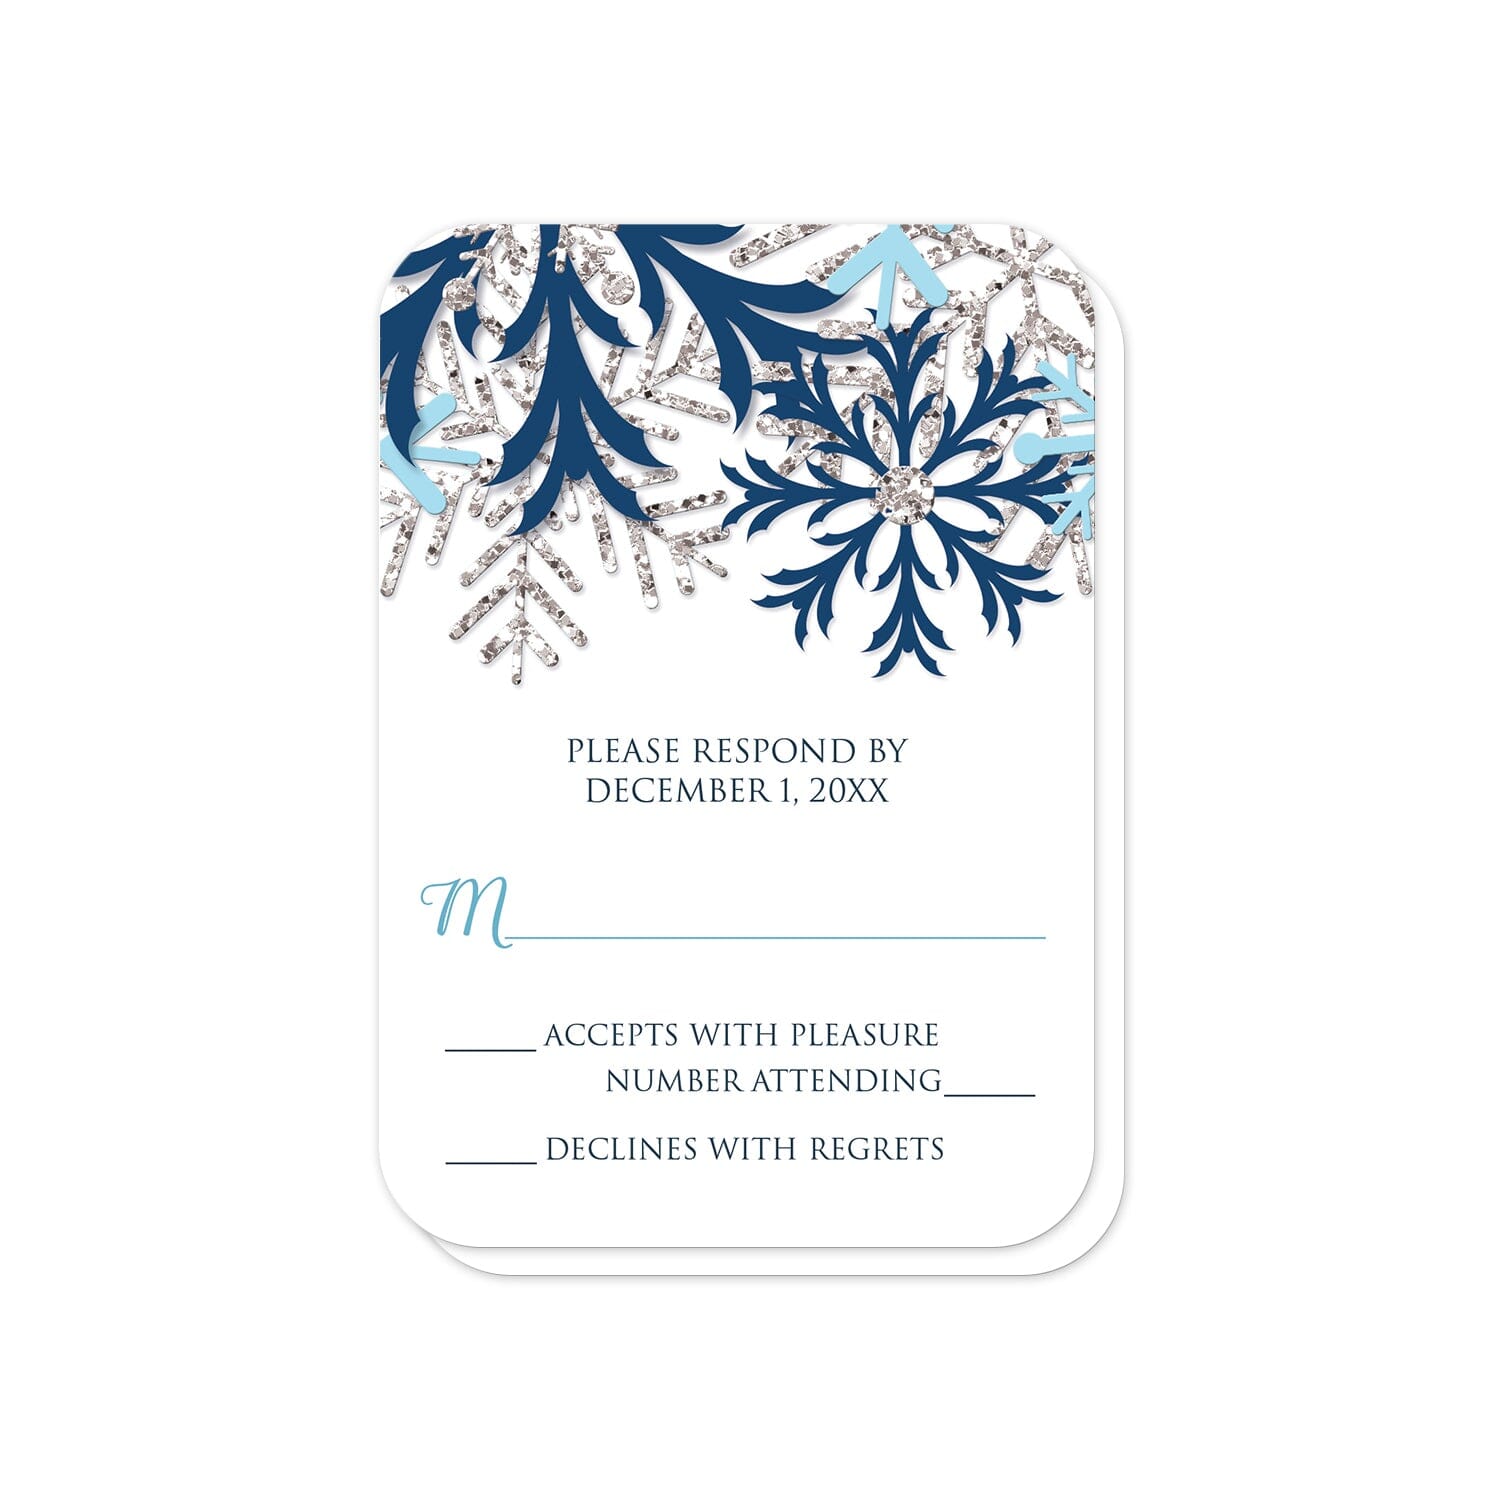 Winter Blue Silver Snowflake RSVP Cards (with rounded corners) at Artistically Invited.